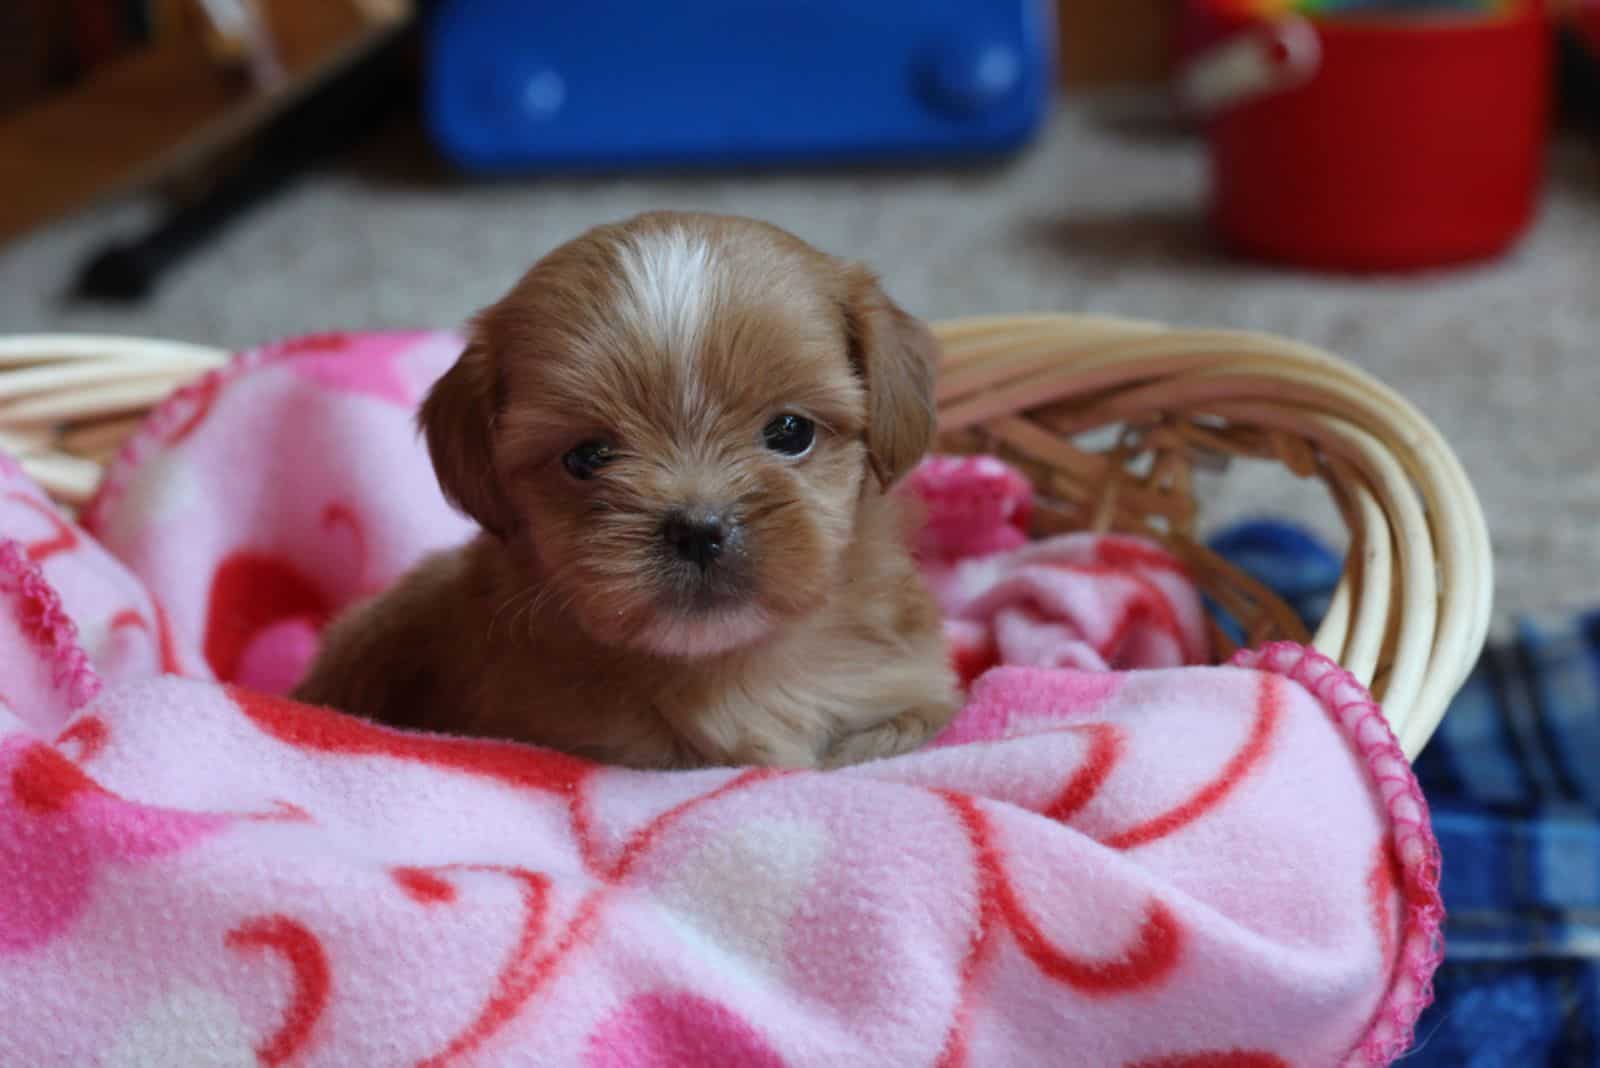 Shih Poo puppy in a basket